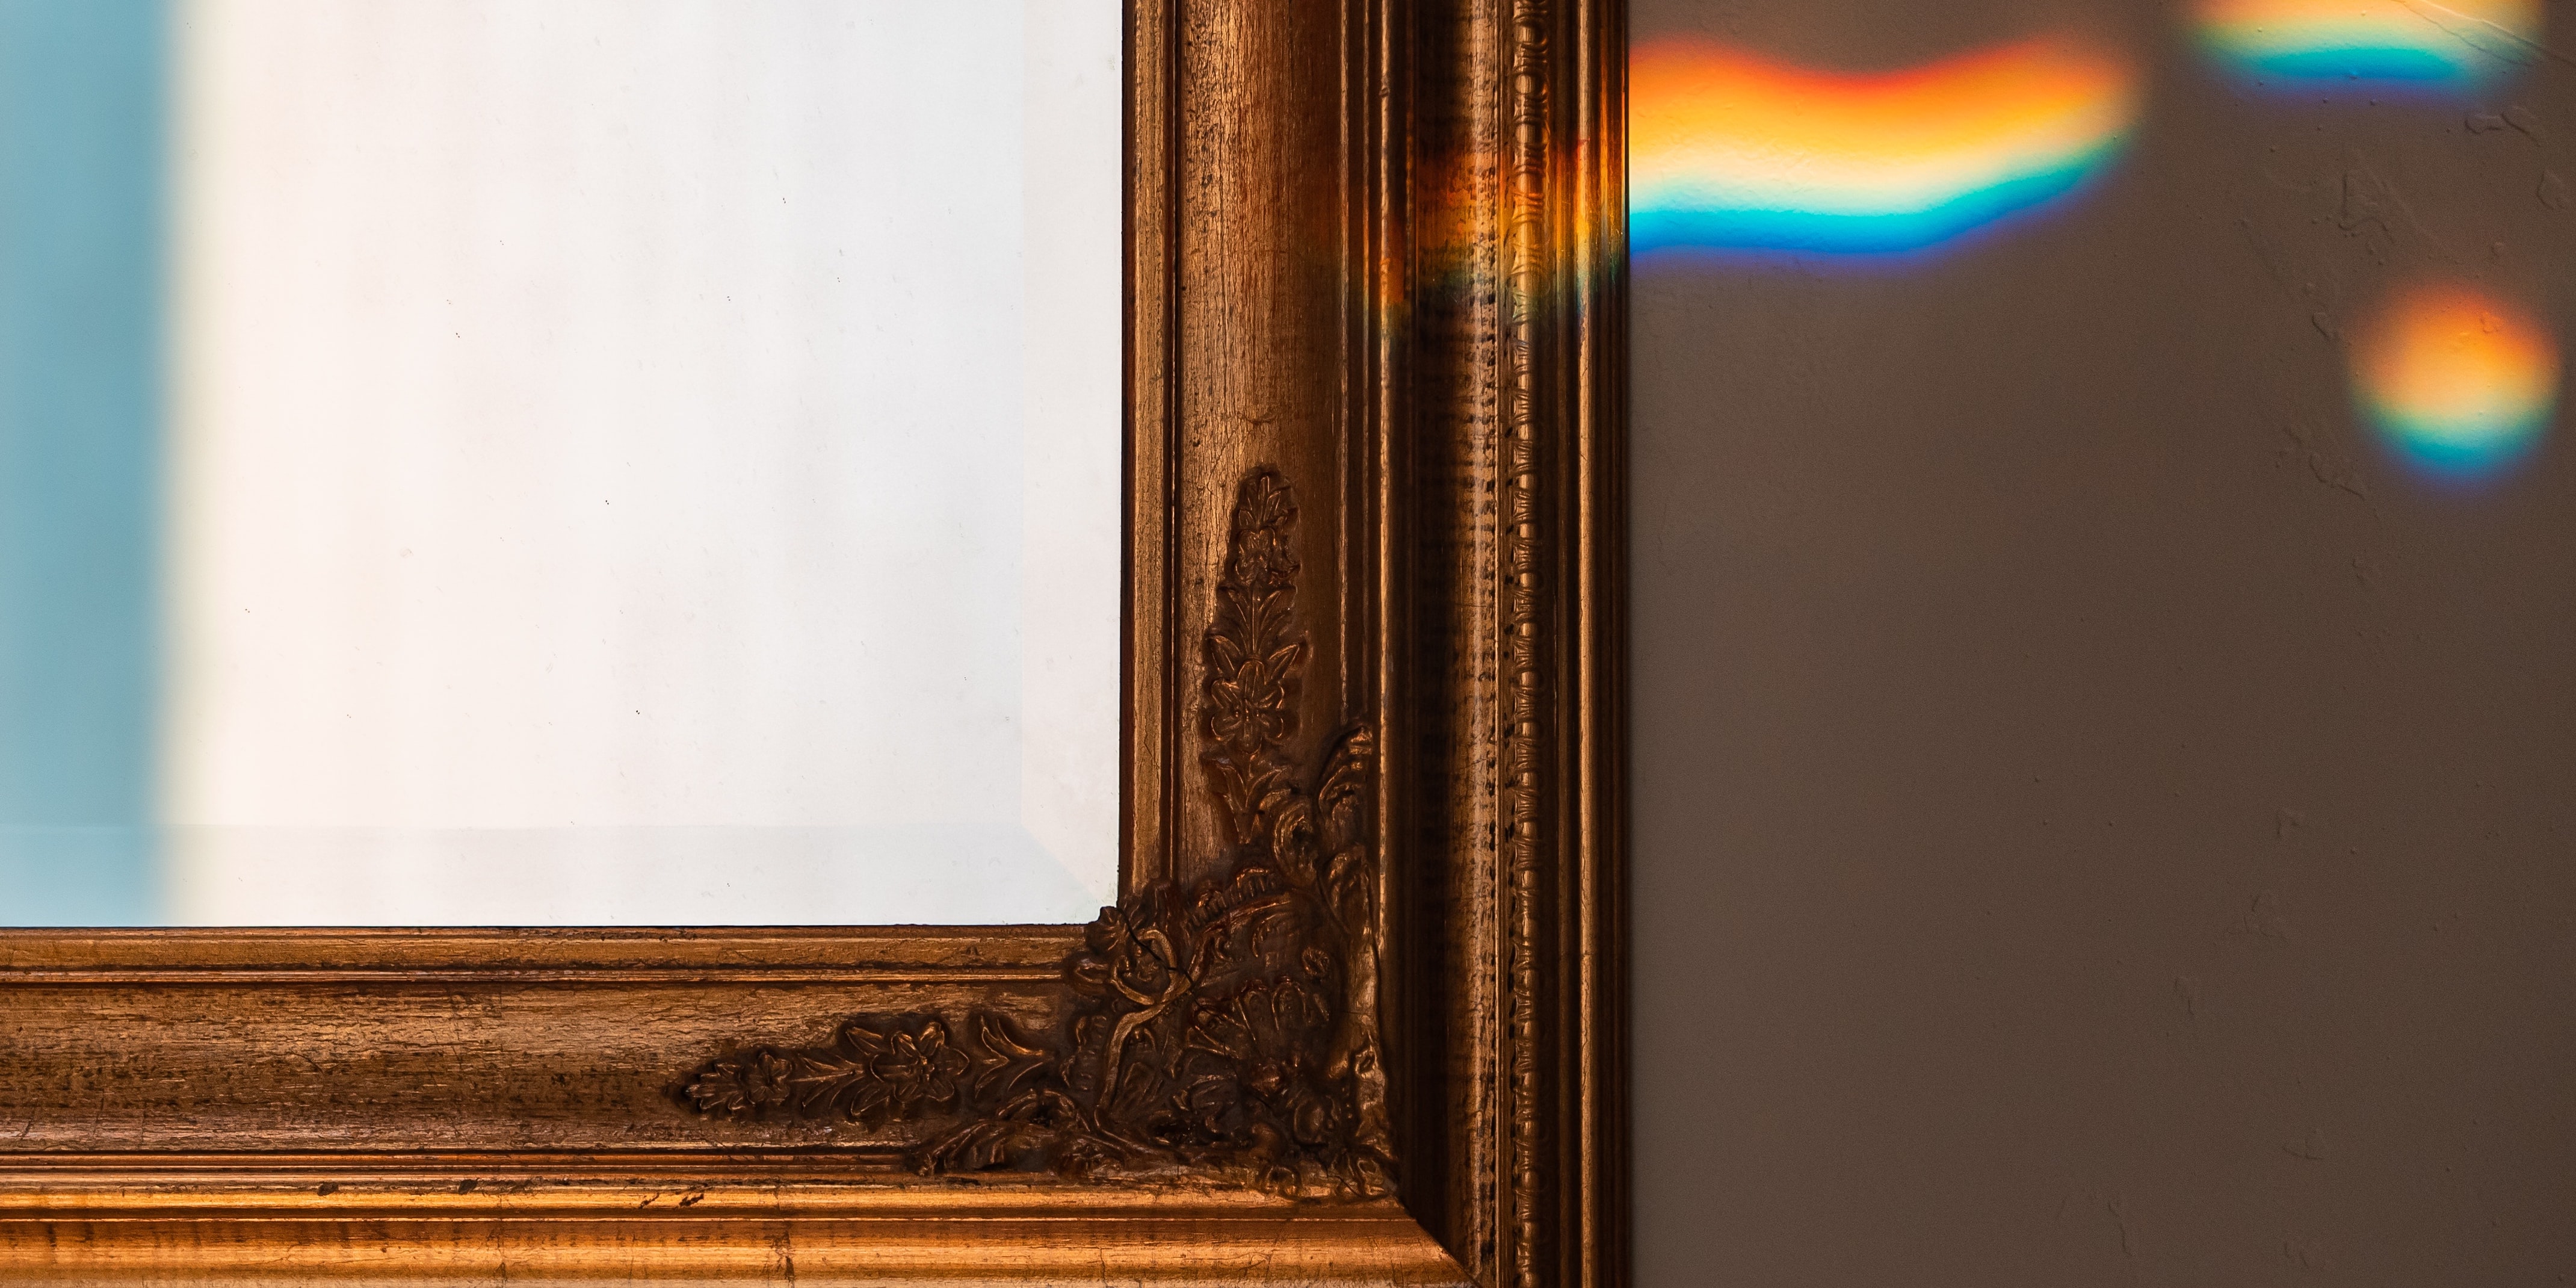 Light reflecting in a mirror creating a rainbow effect